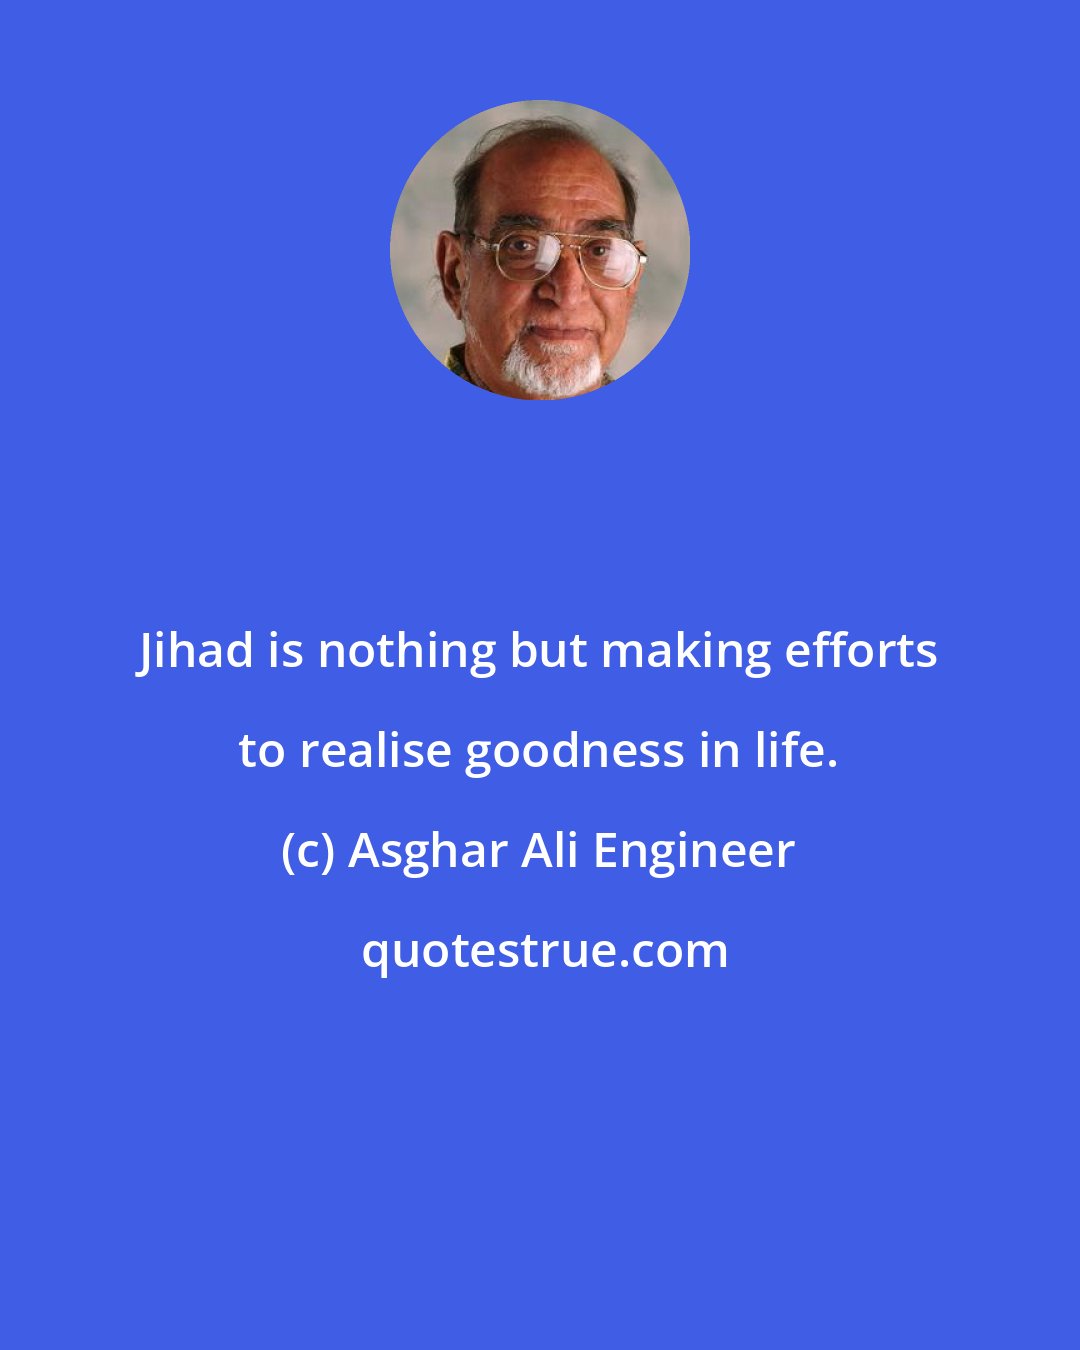 Asghar Ali Engineer: Jihad is nothing but making efforts to realise goodness in life.